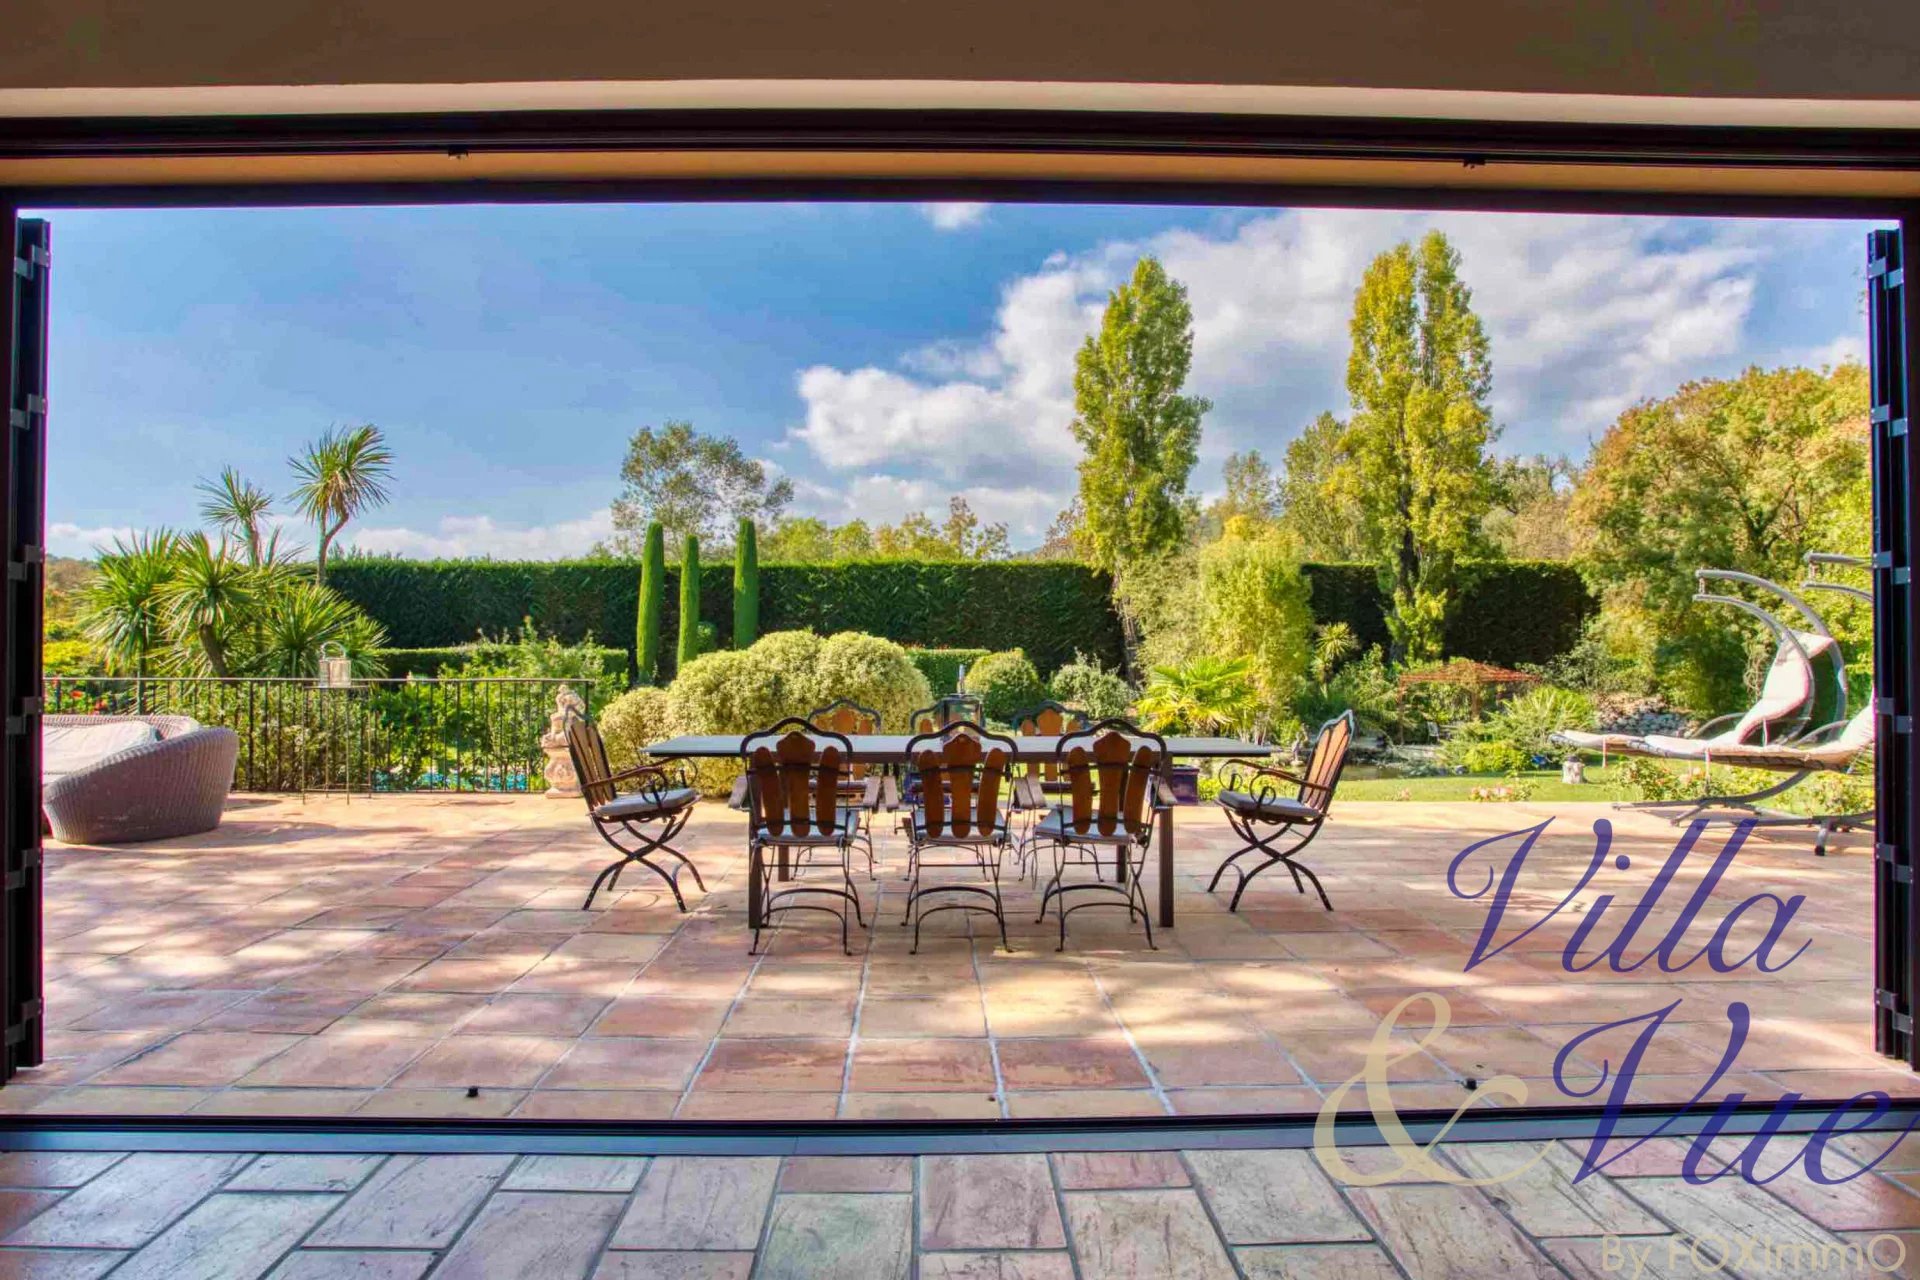 Chateauneuf, Magnificent Bastide, 280m2, 5 bedrooms, outbuilding, 5000m2 of flat and landscaped grounds, swimming pool, triple garage